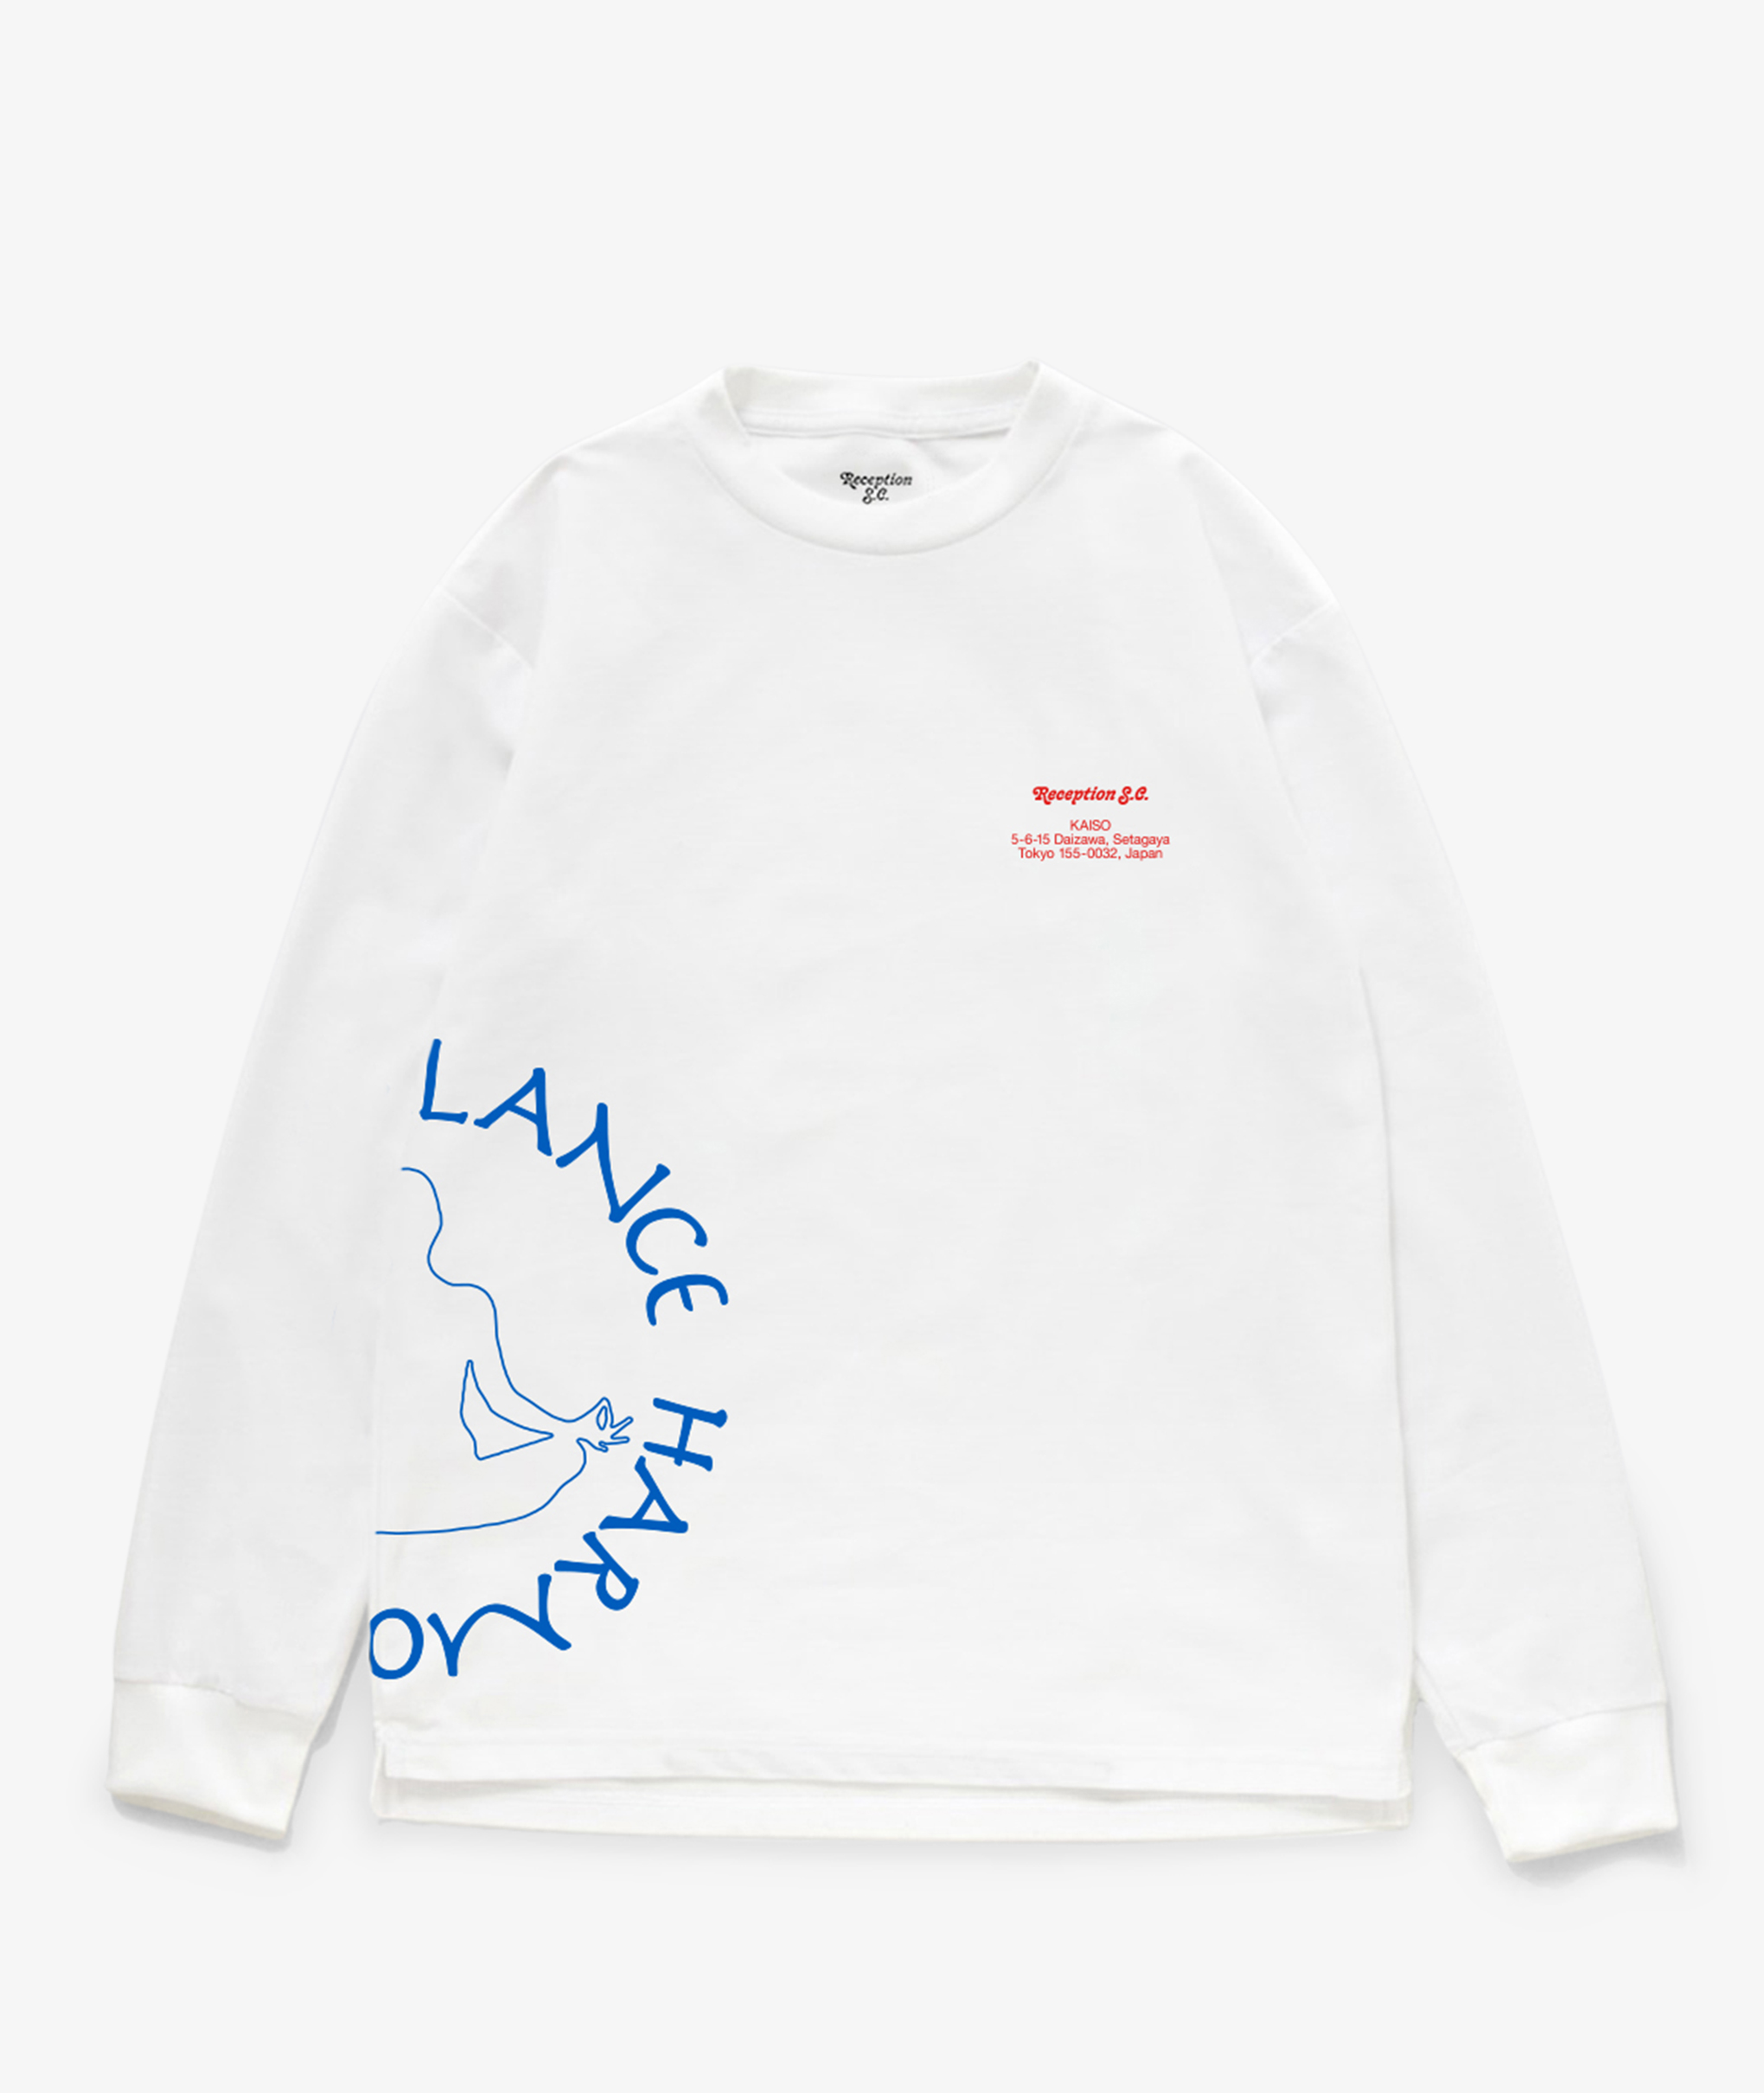 Norse Store | Shipping Worldwide - Reception LS Tee Kaiso Bakey